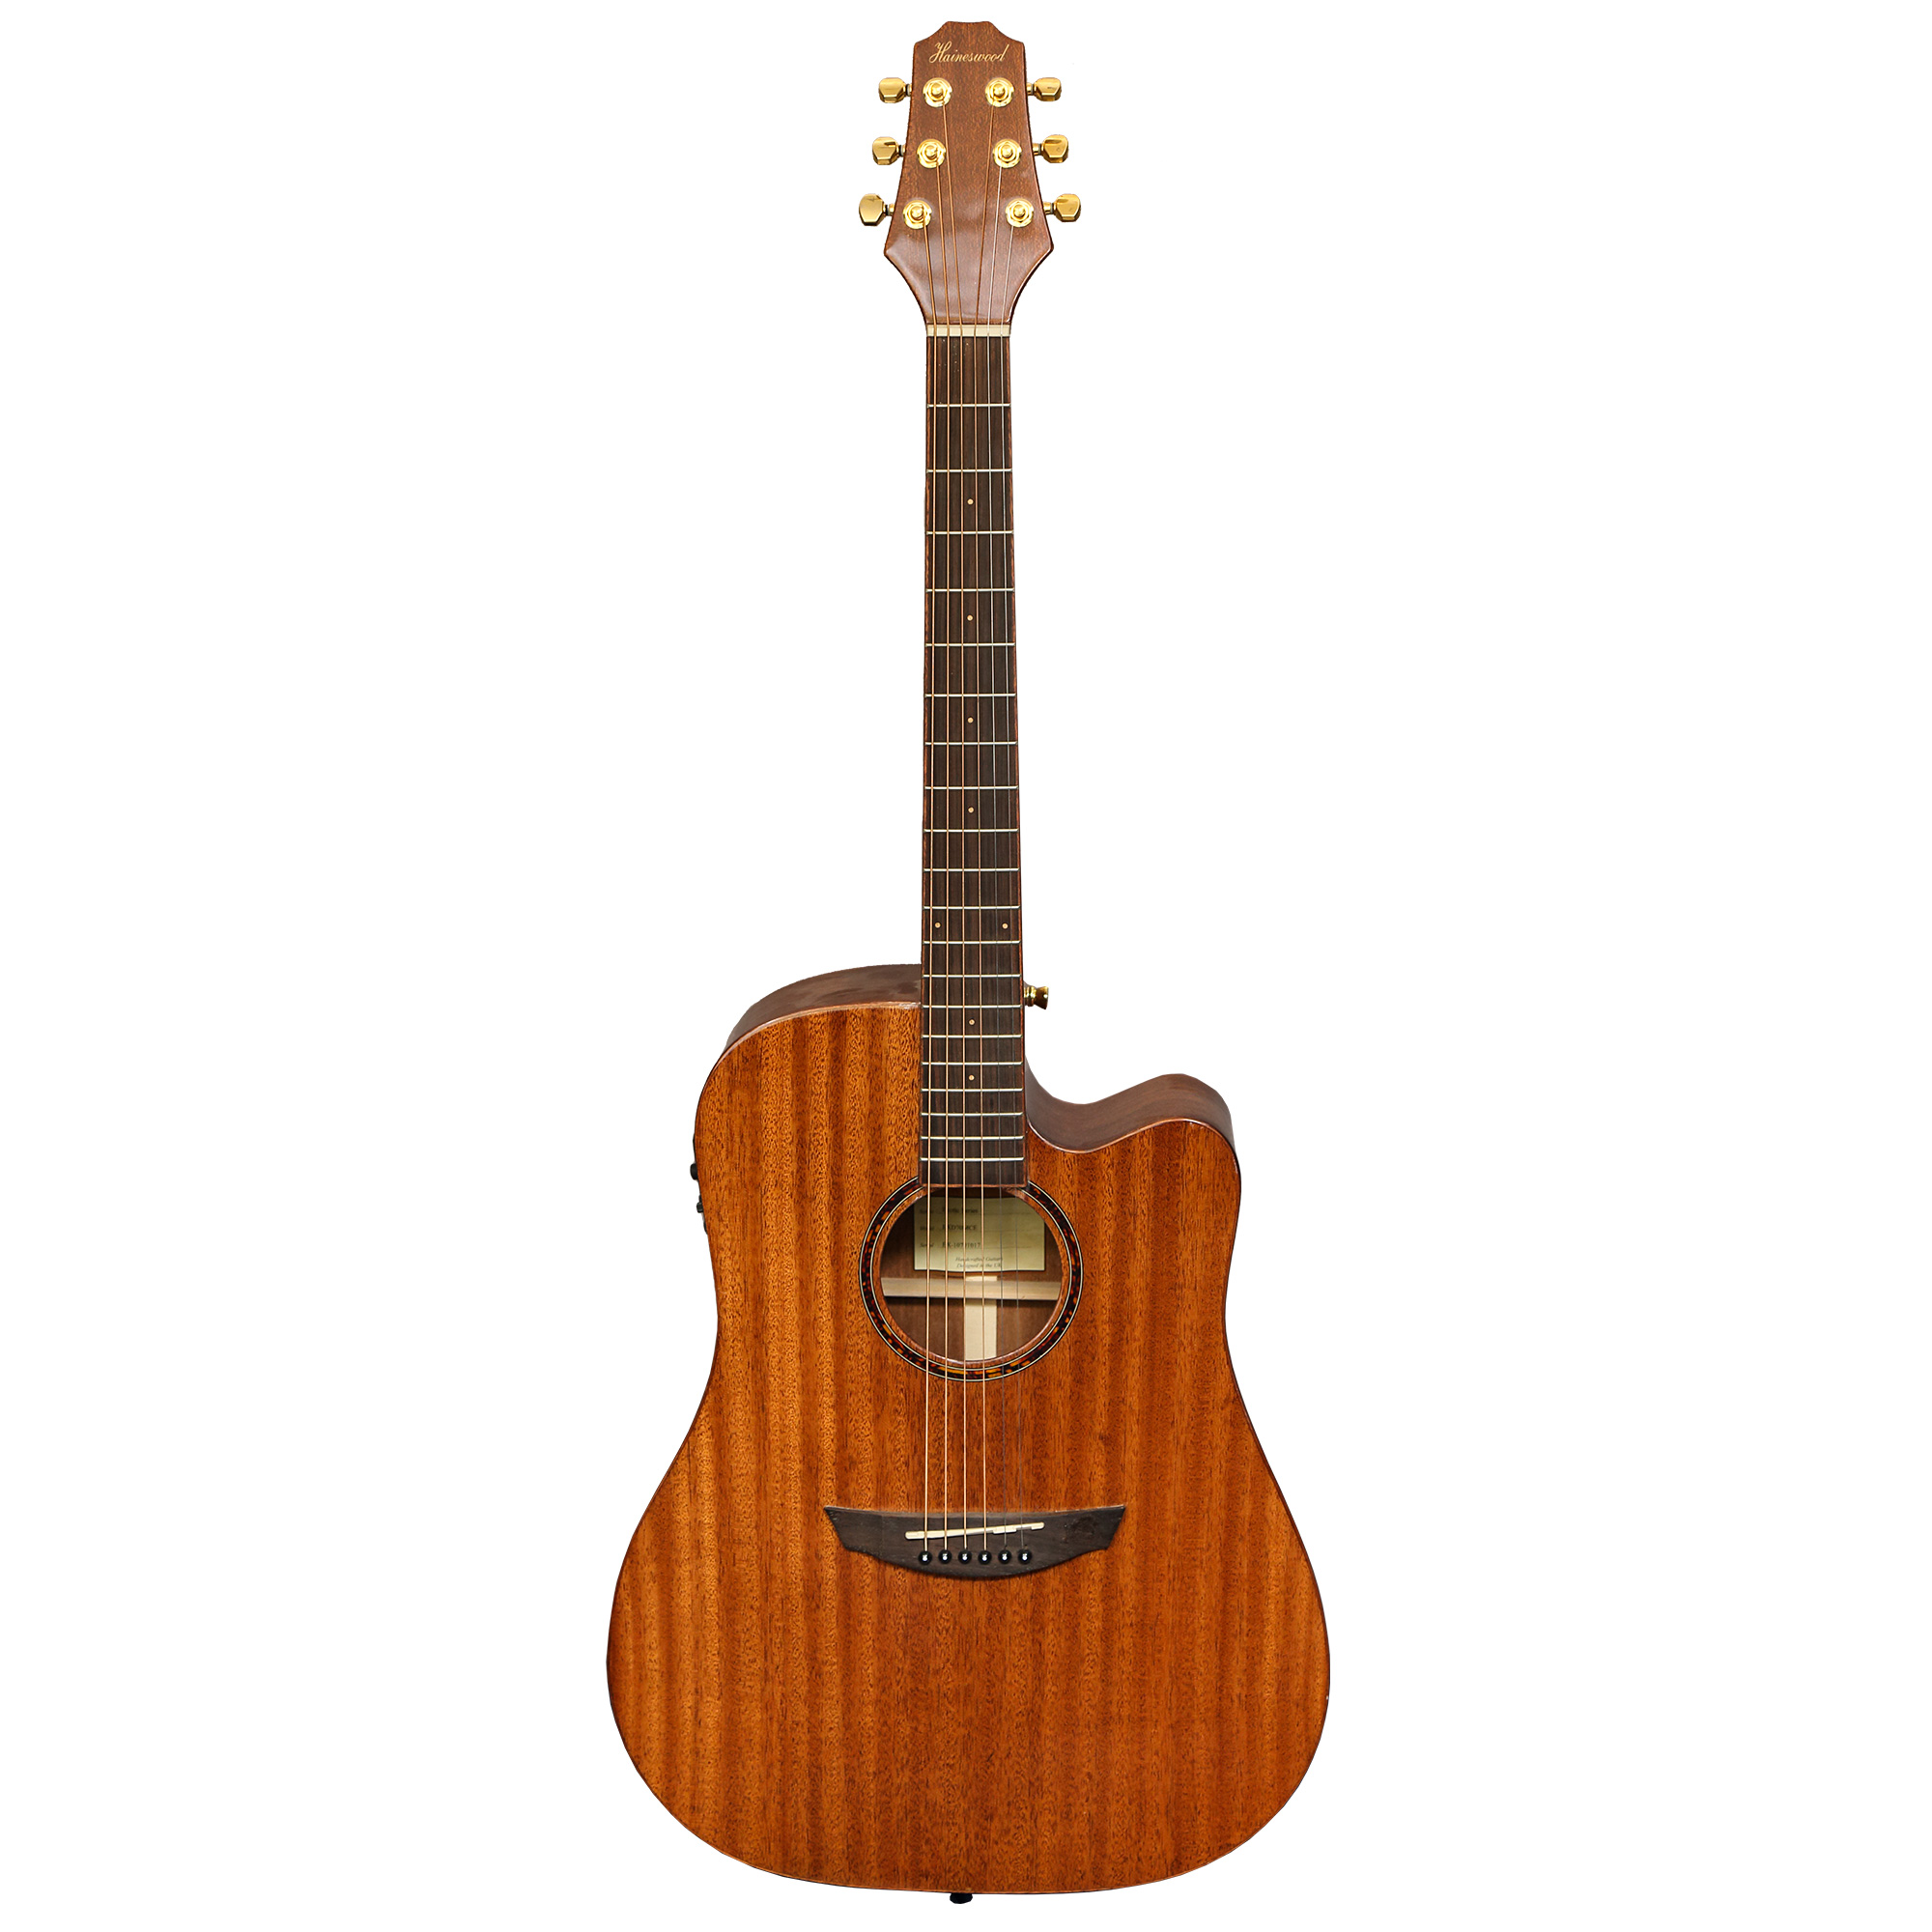 Haineswood Exotic EXD70MCE Dreadnought Cutaway Electro